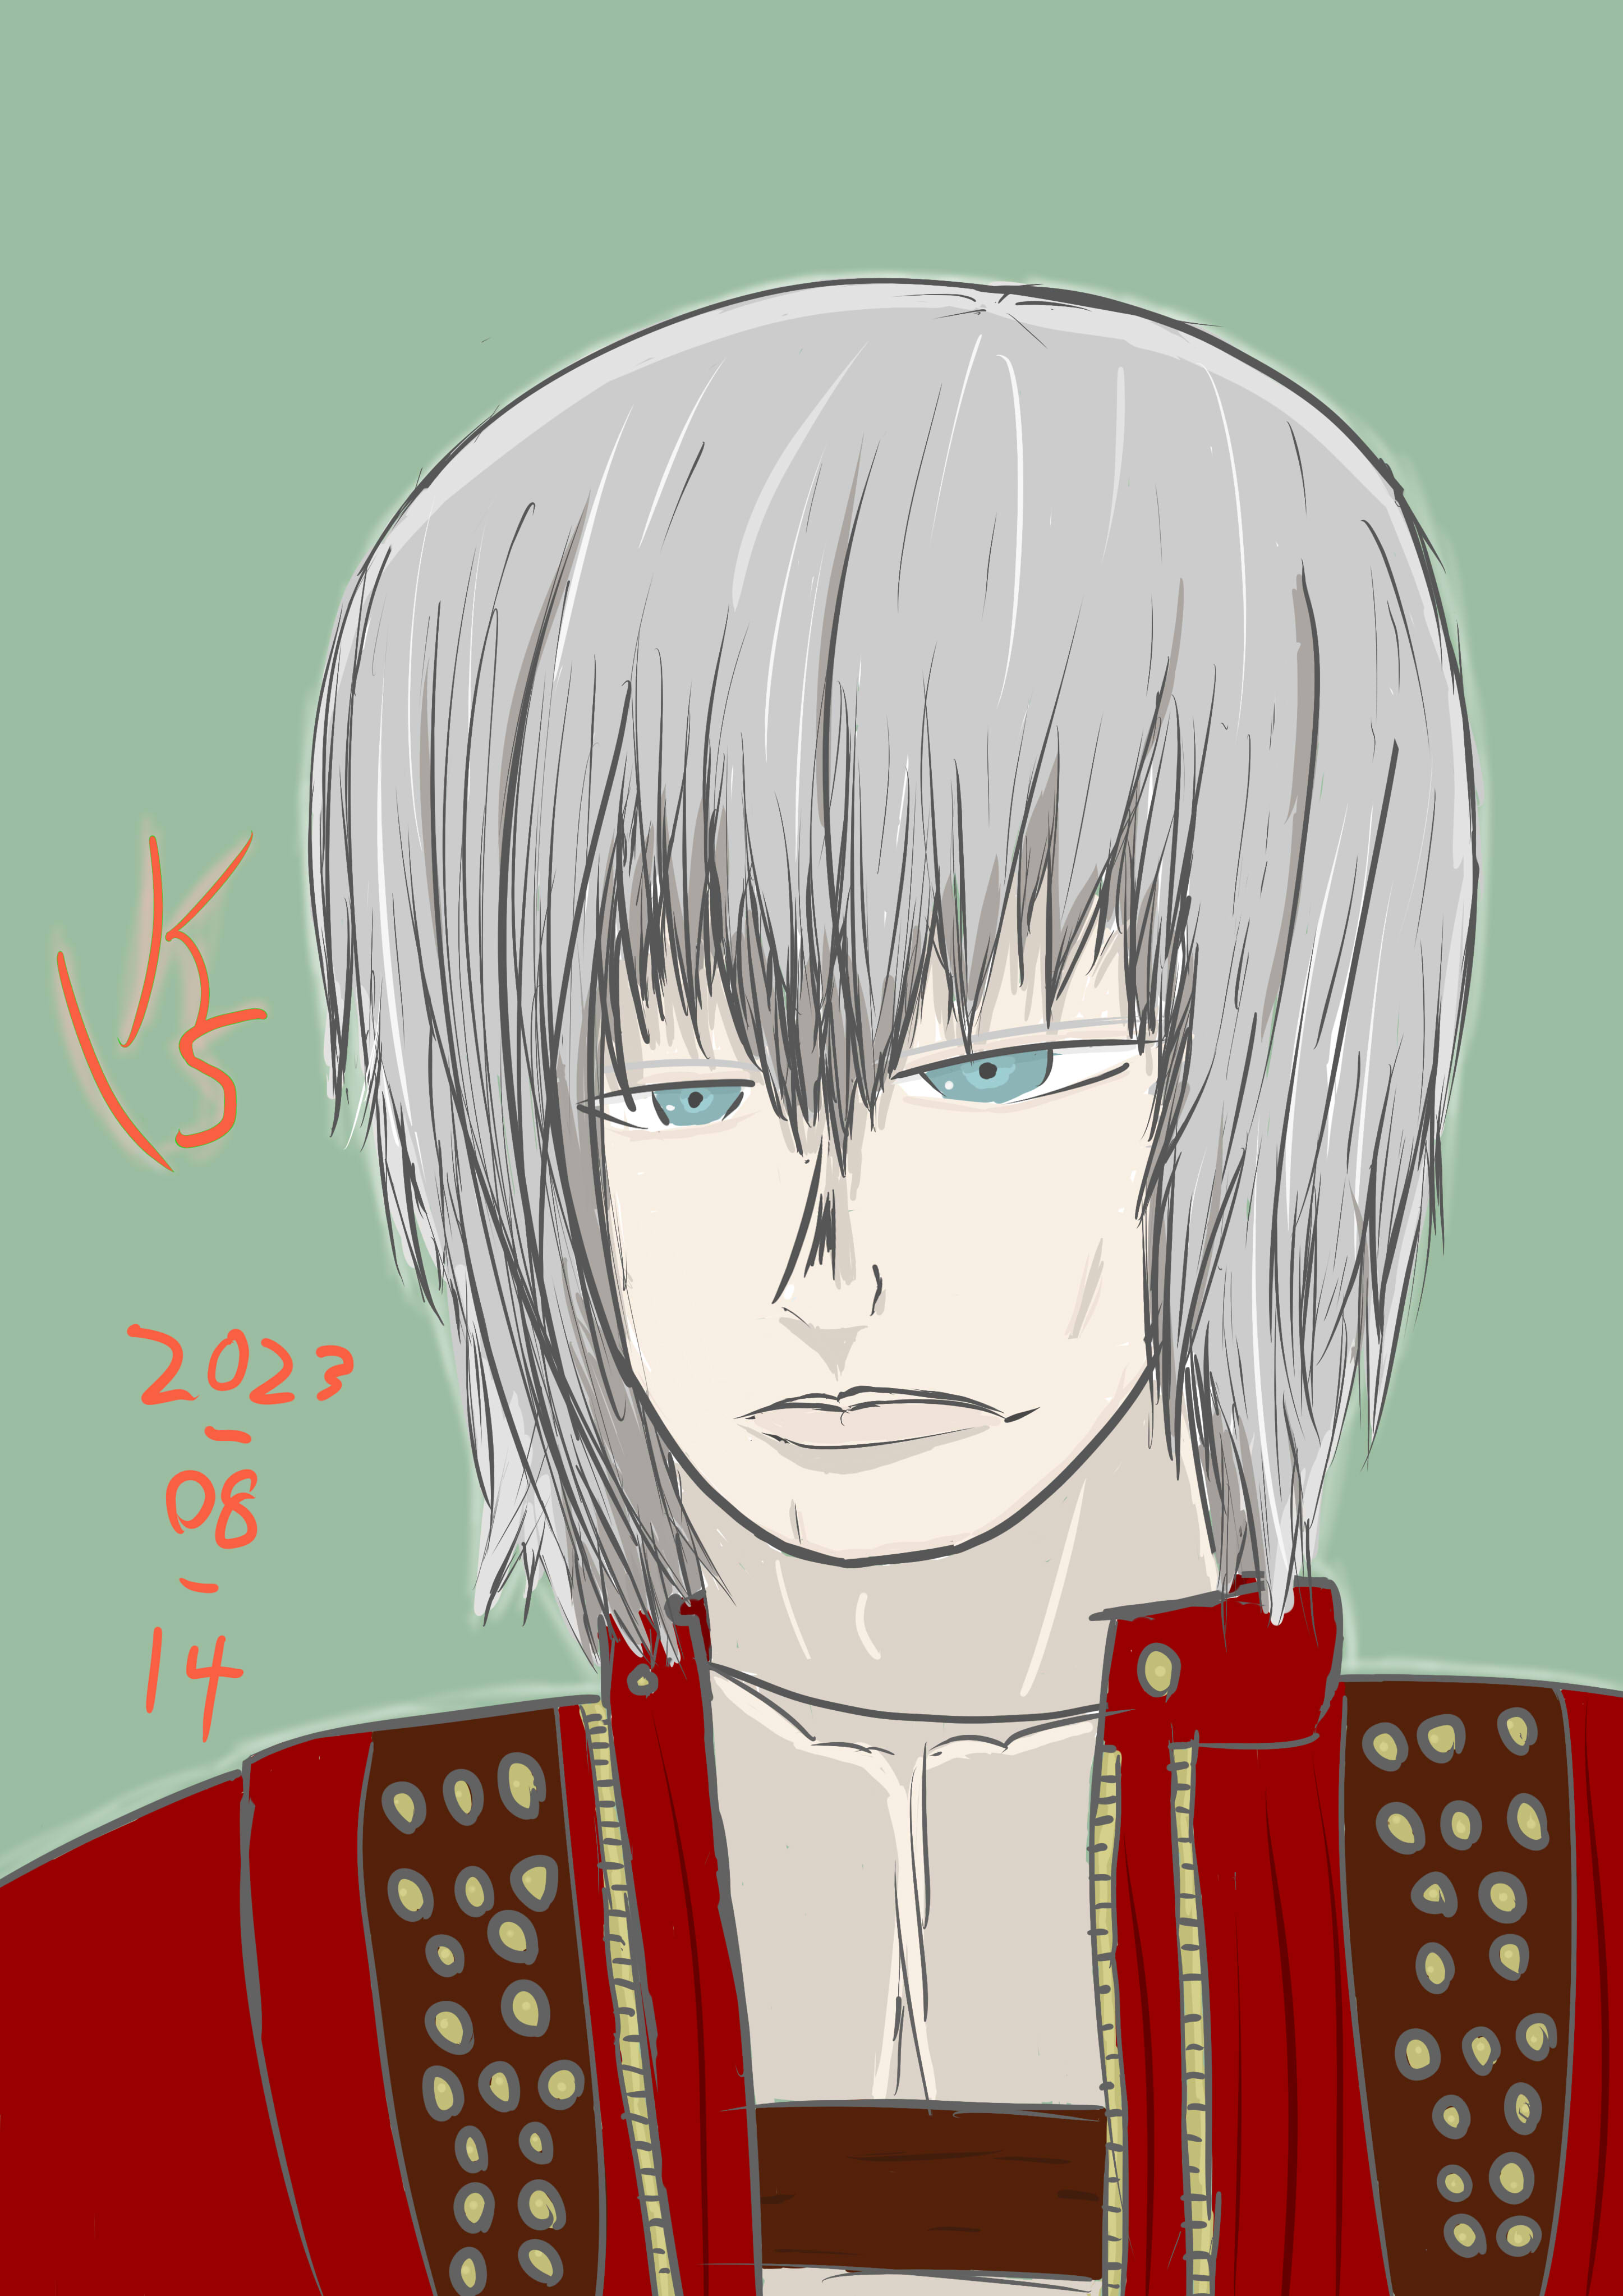 Practice, Featuring Dante From the Devil May Cry Series